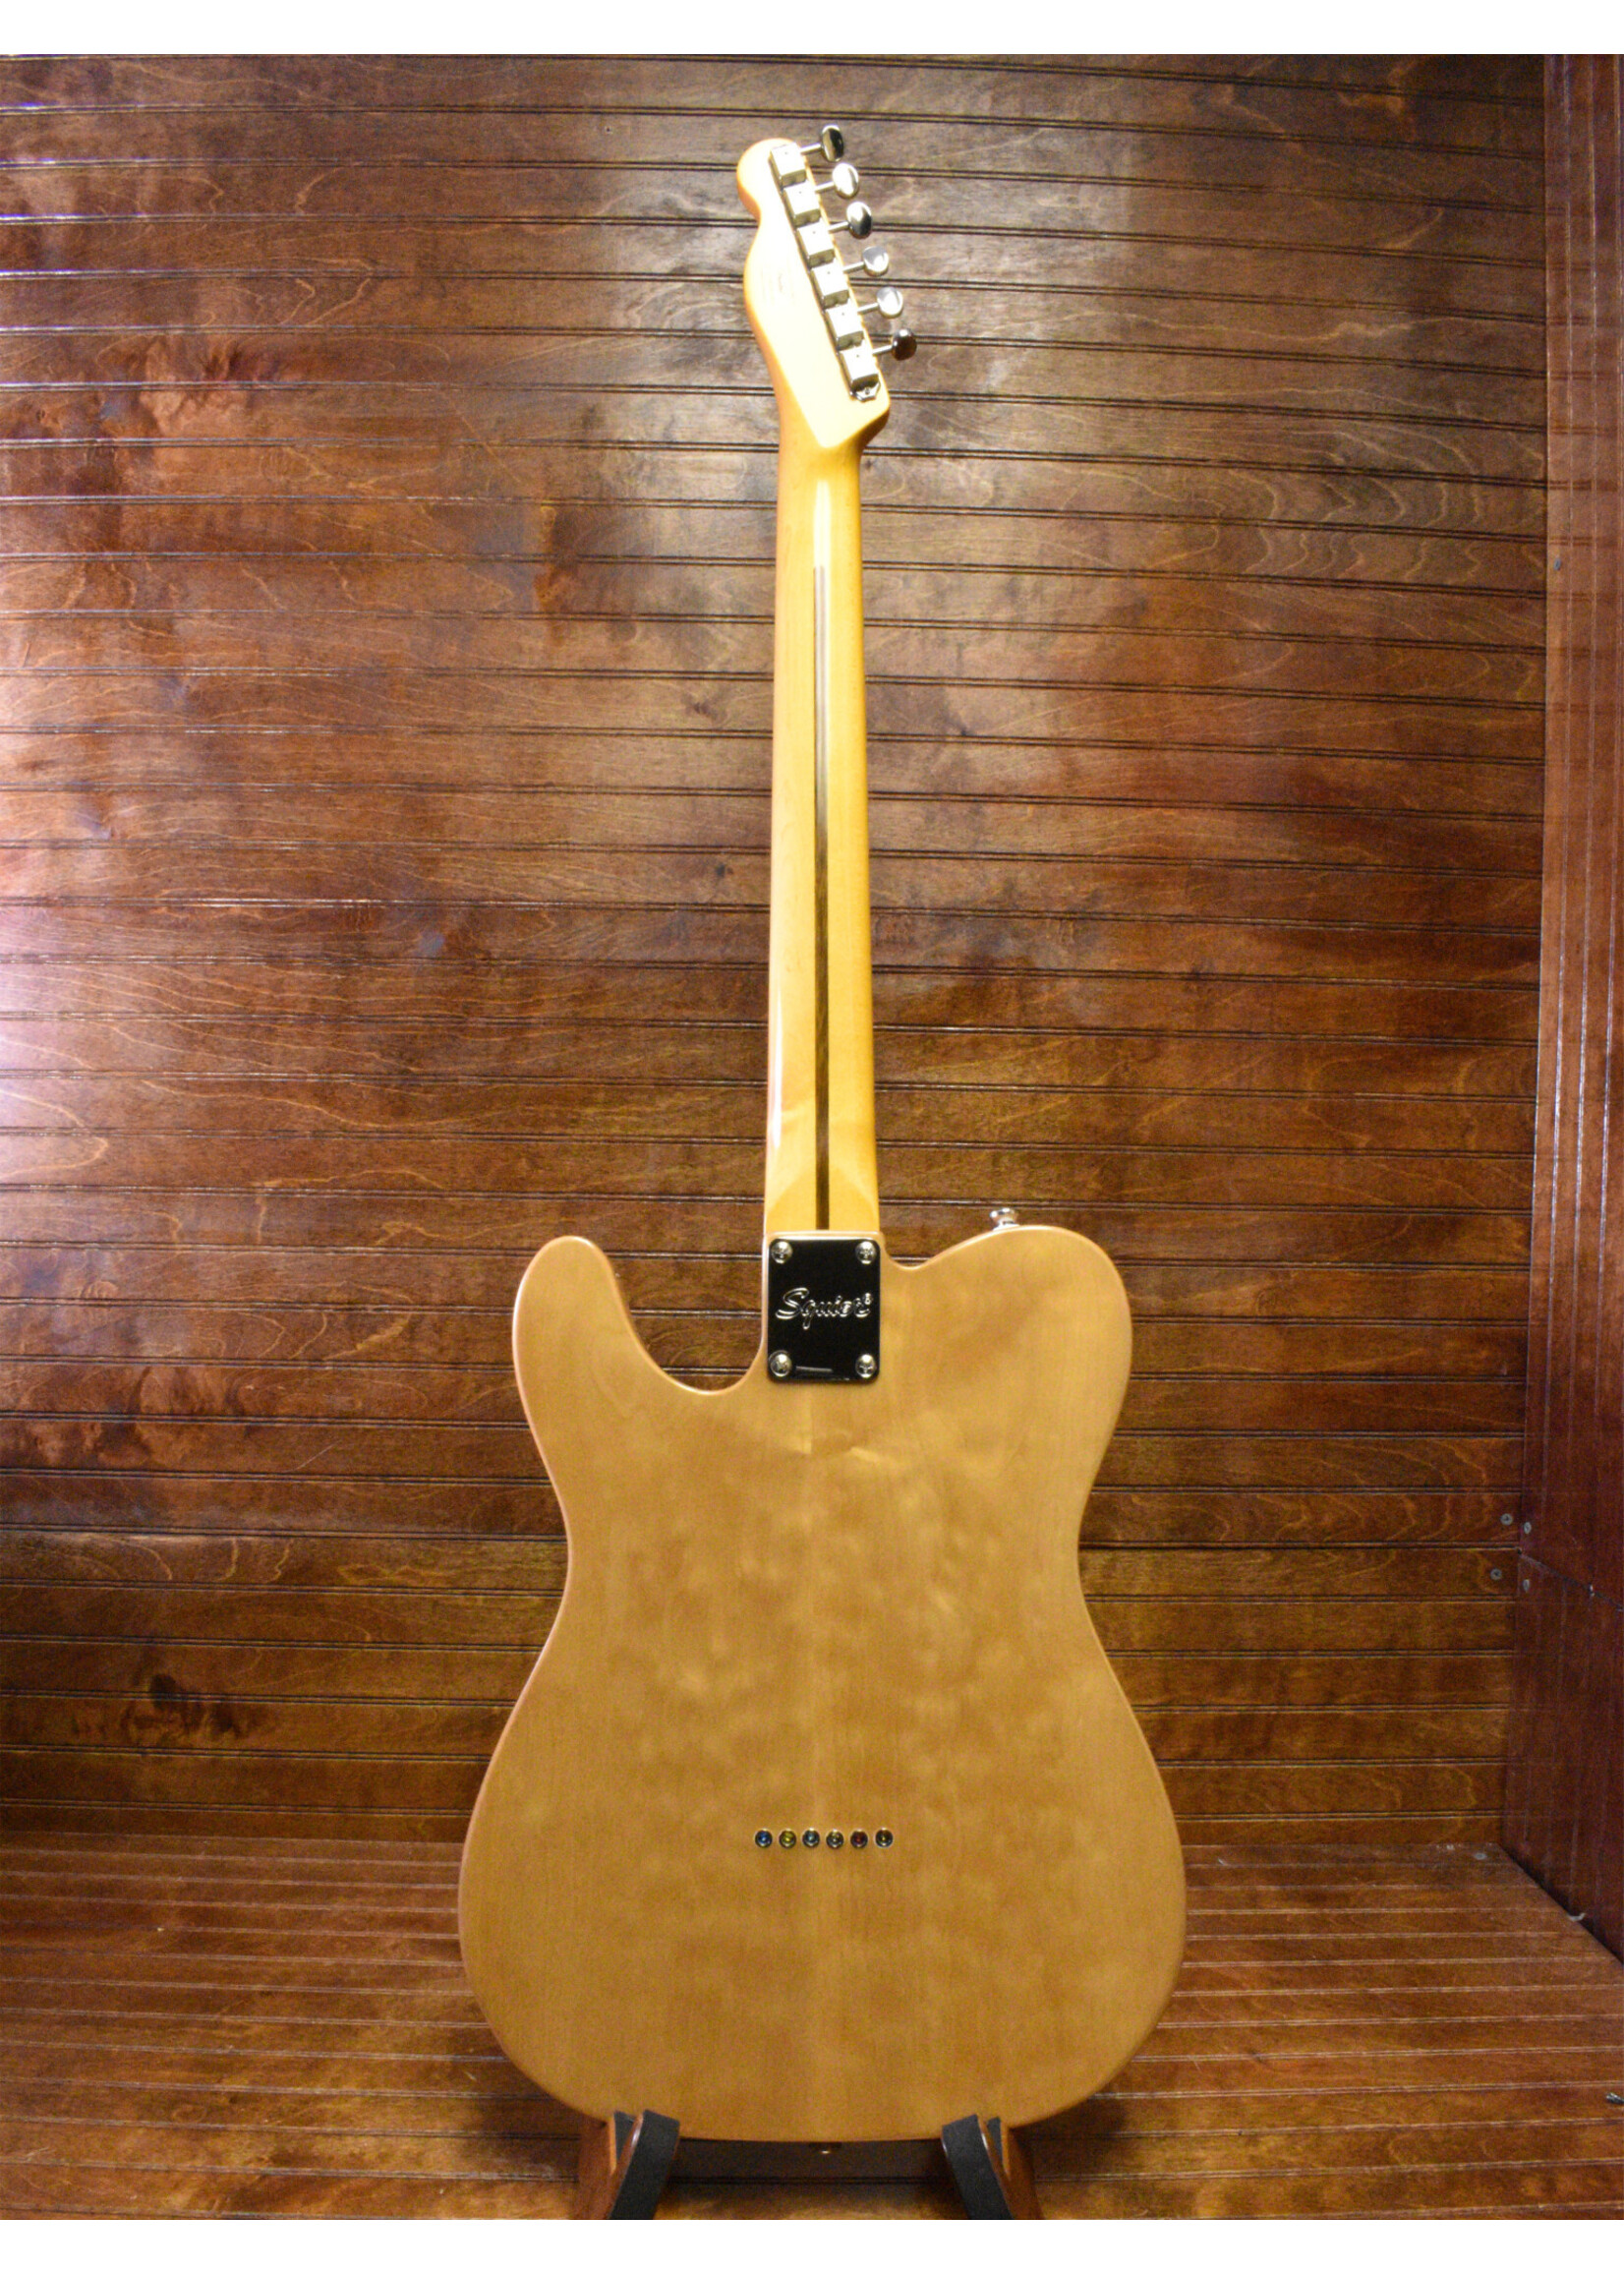 Squier Squier Classic Vibe 70's Thinline Telecaster Natural HH